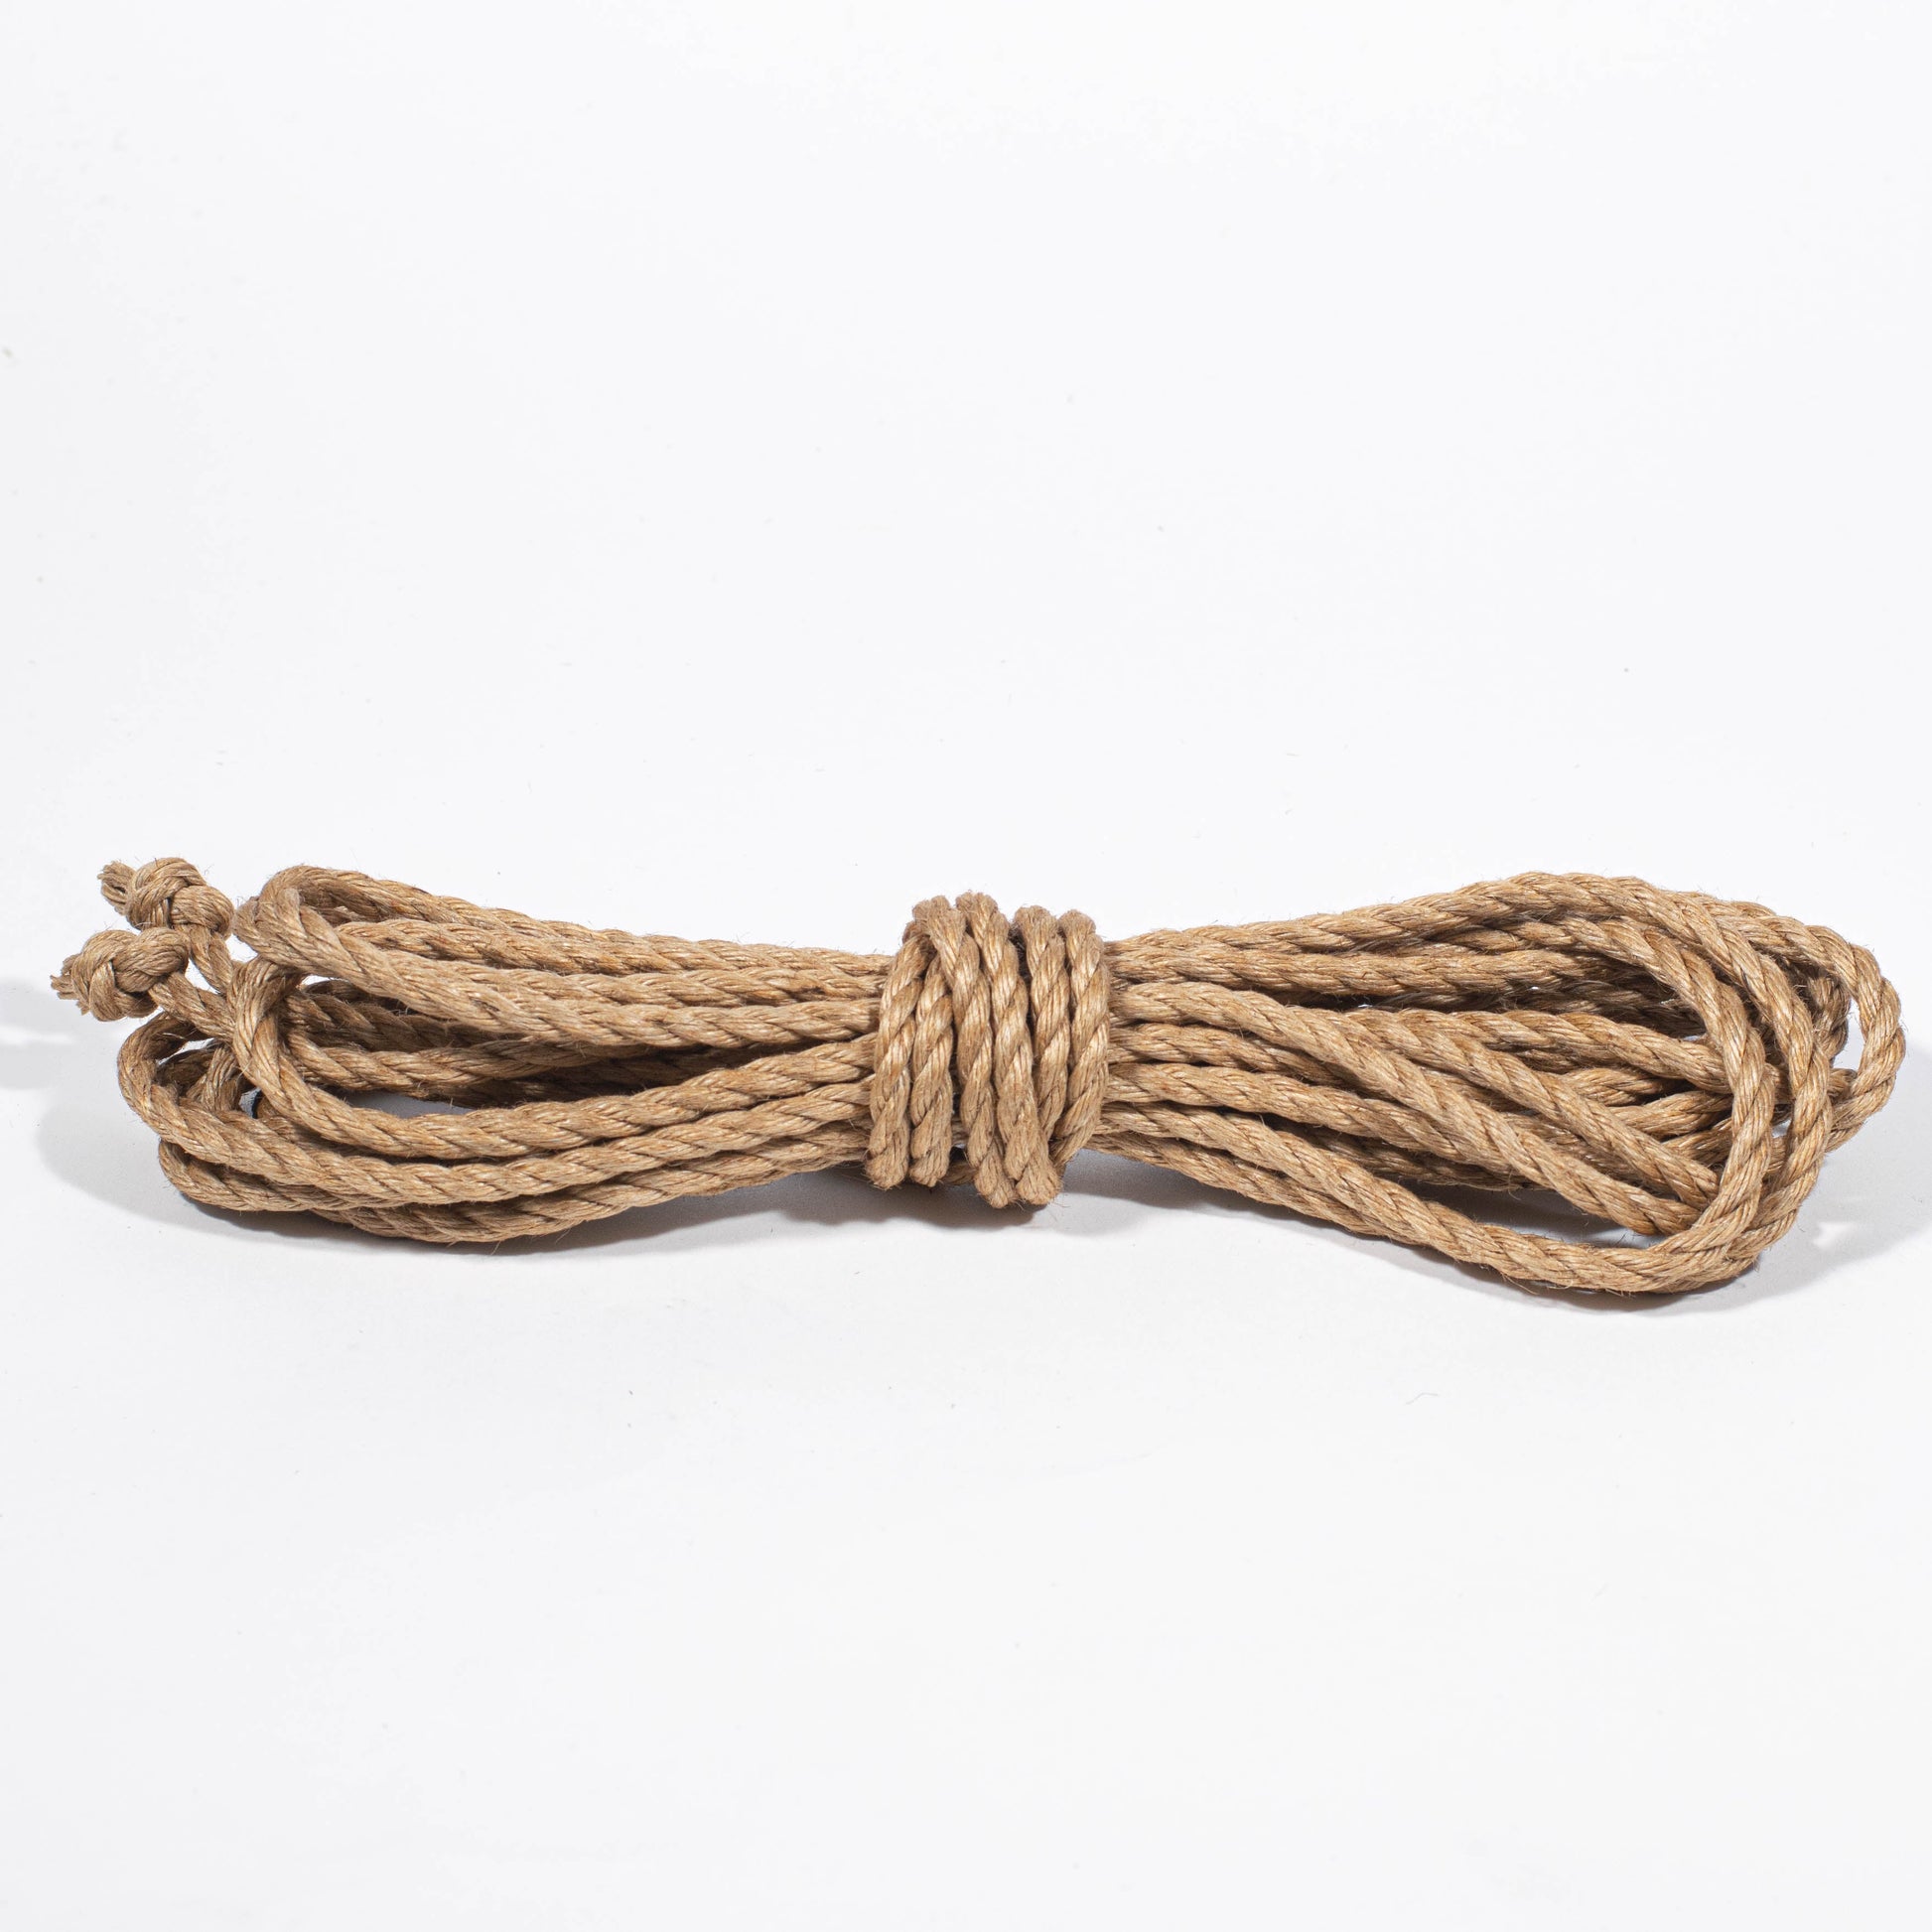 100% Natural 6mm Jute Rope for Shibari | Soft and Durable 26.25 feet Long  Ropes | A Complete Shibari Kit for Beginners with Jute Rope, Drawstring  Bag